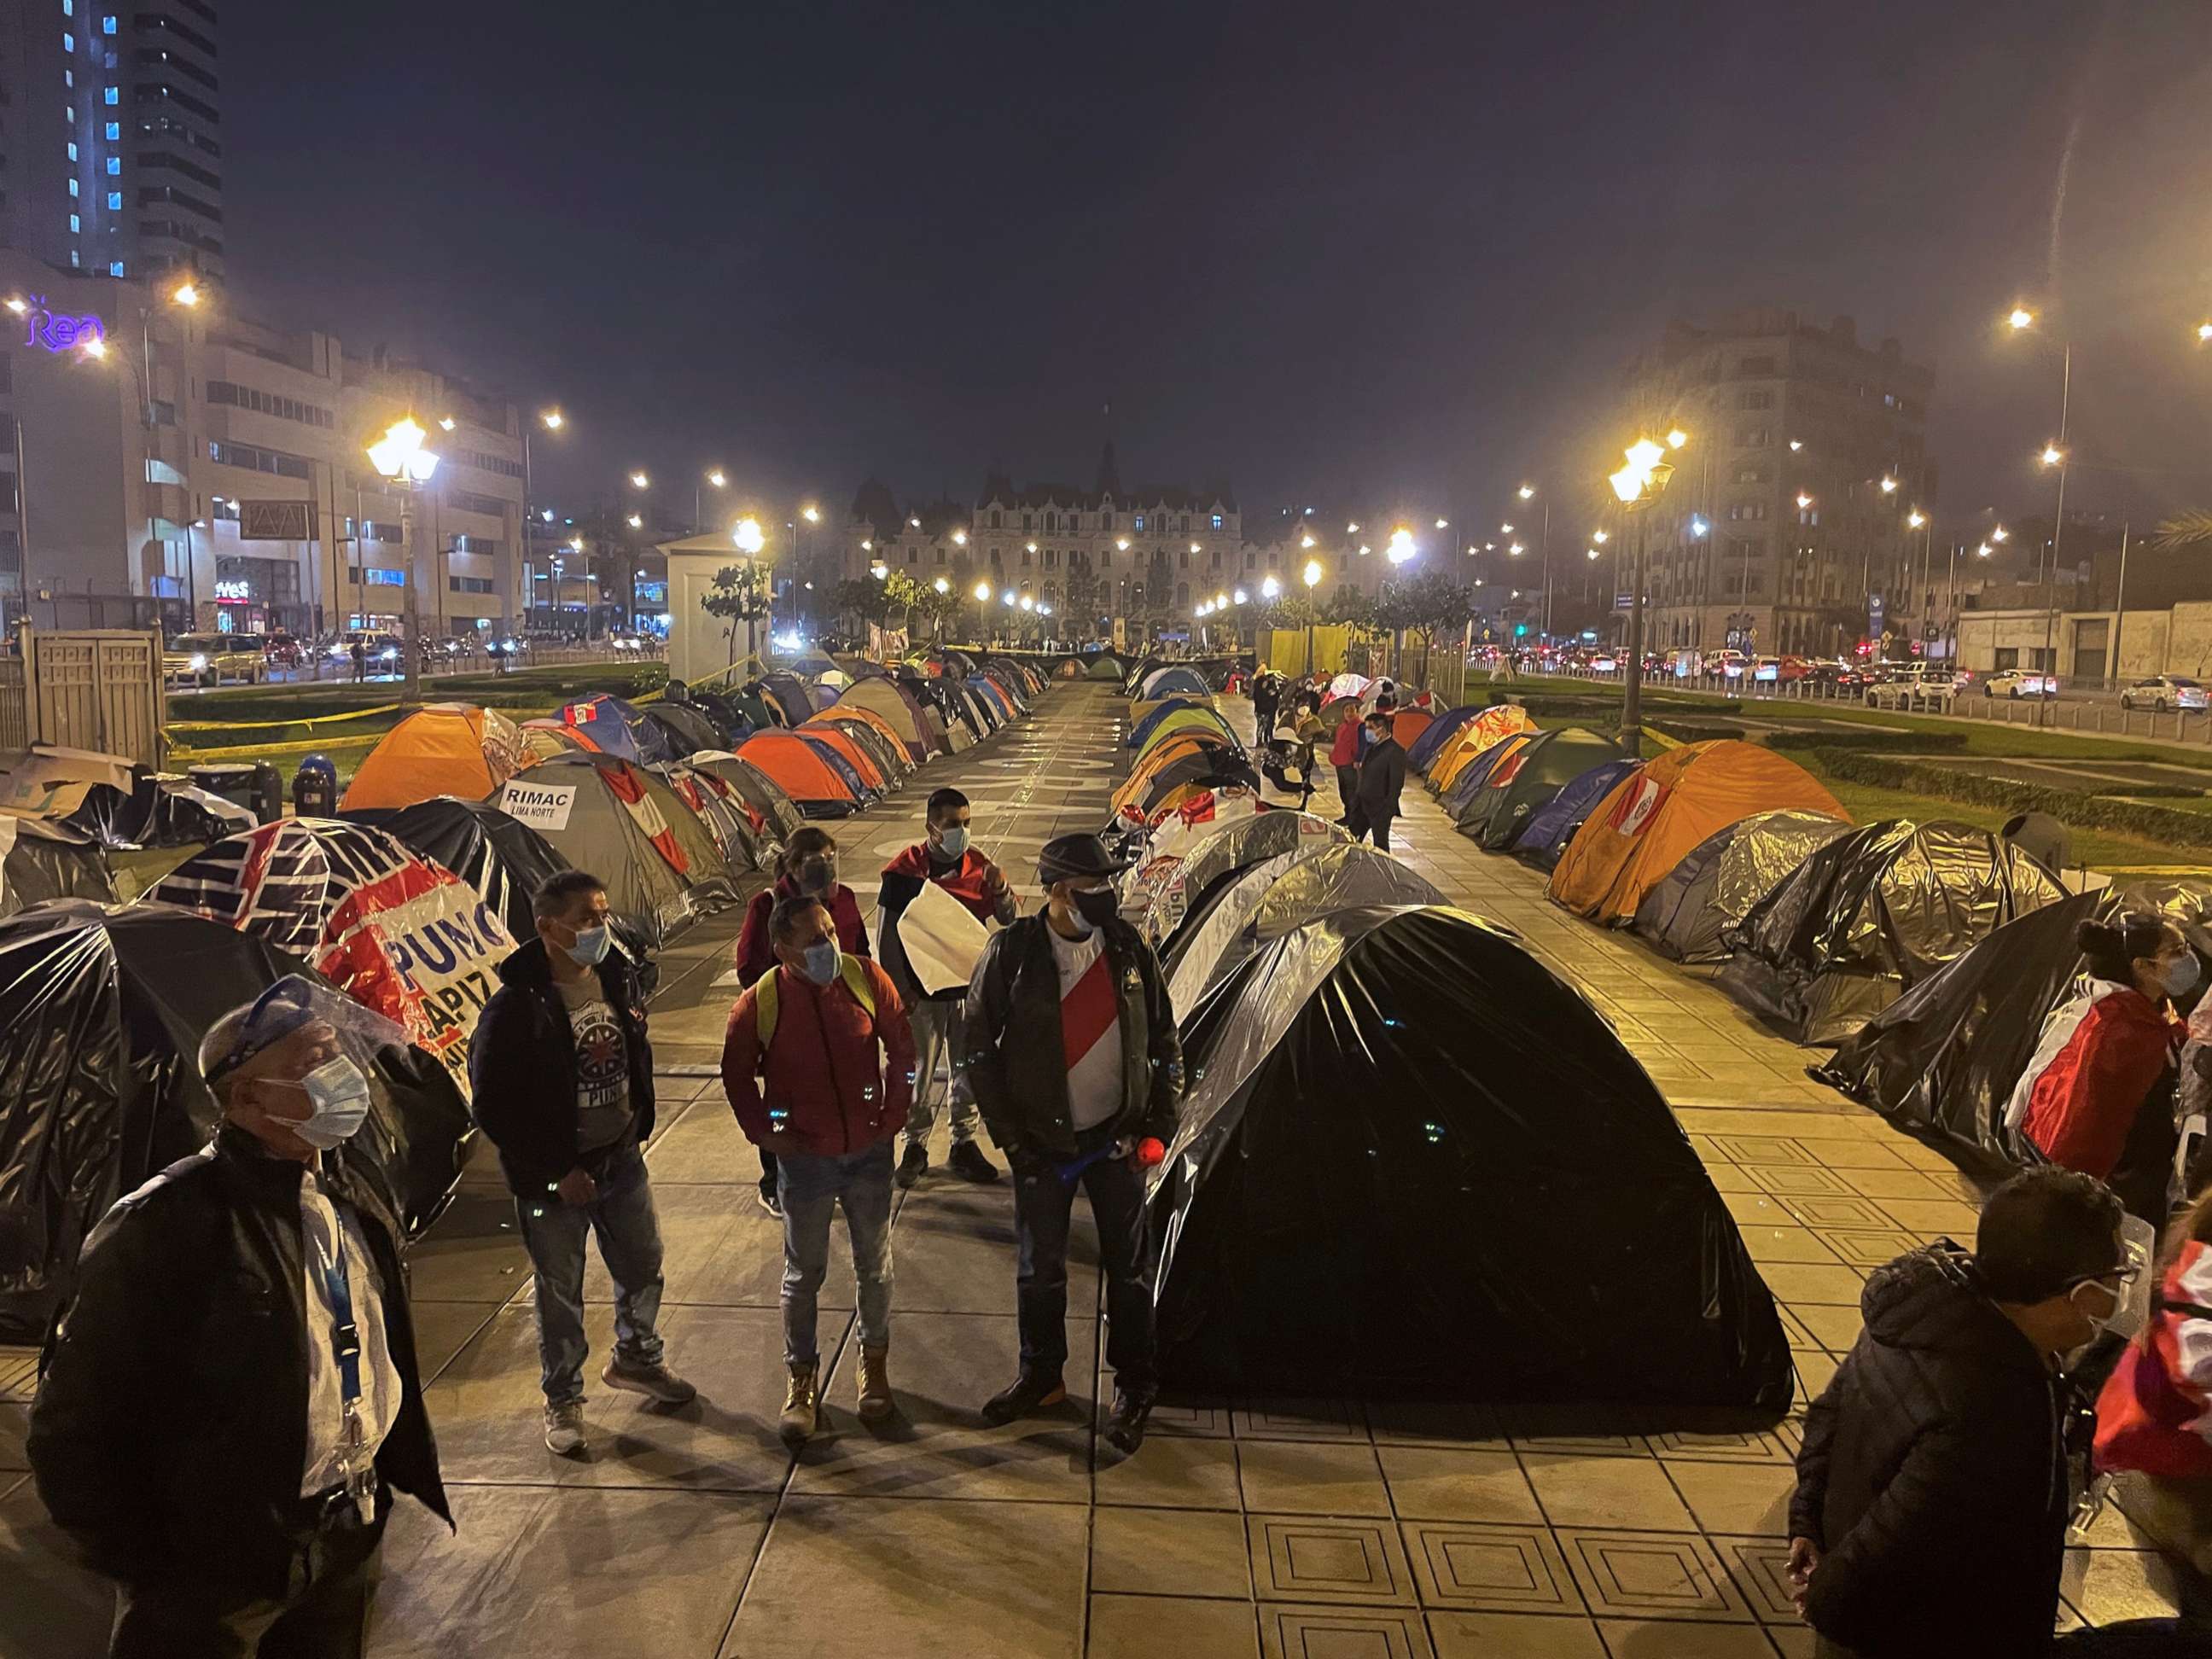 PHOTO: Supporters of right-wing candidate Keiko Fujimori camped out in front of Peru's Supreme Court demanding an audit of votes following a contested June runoff election.